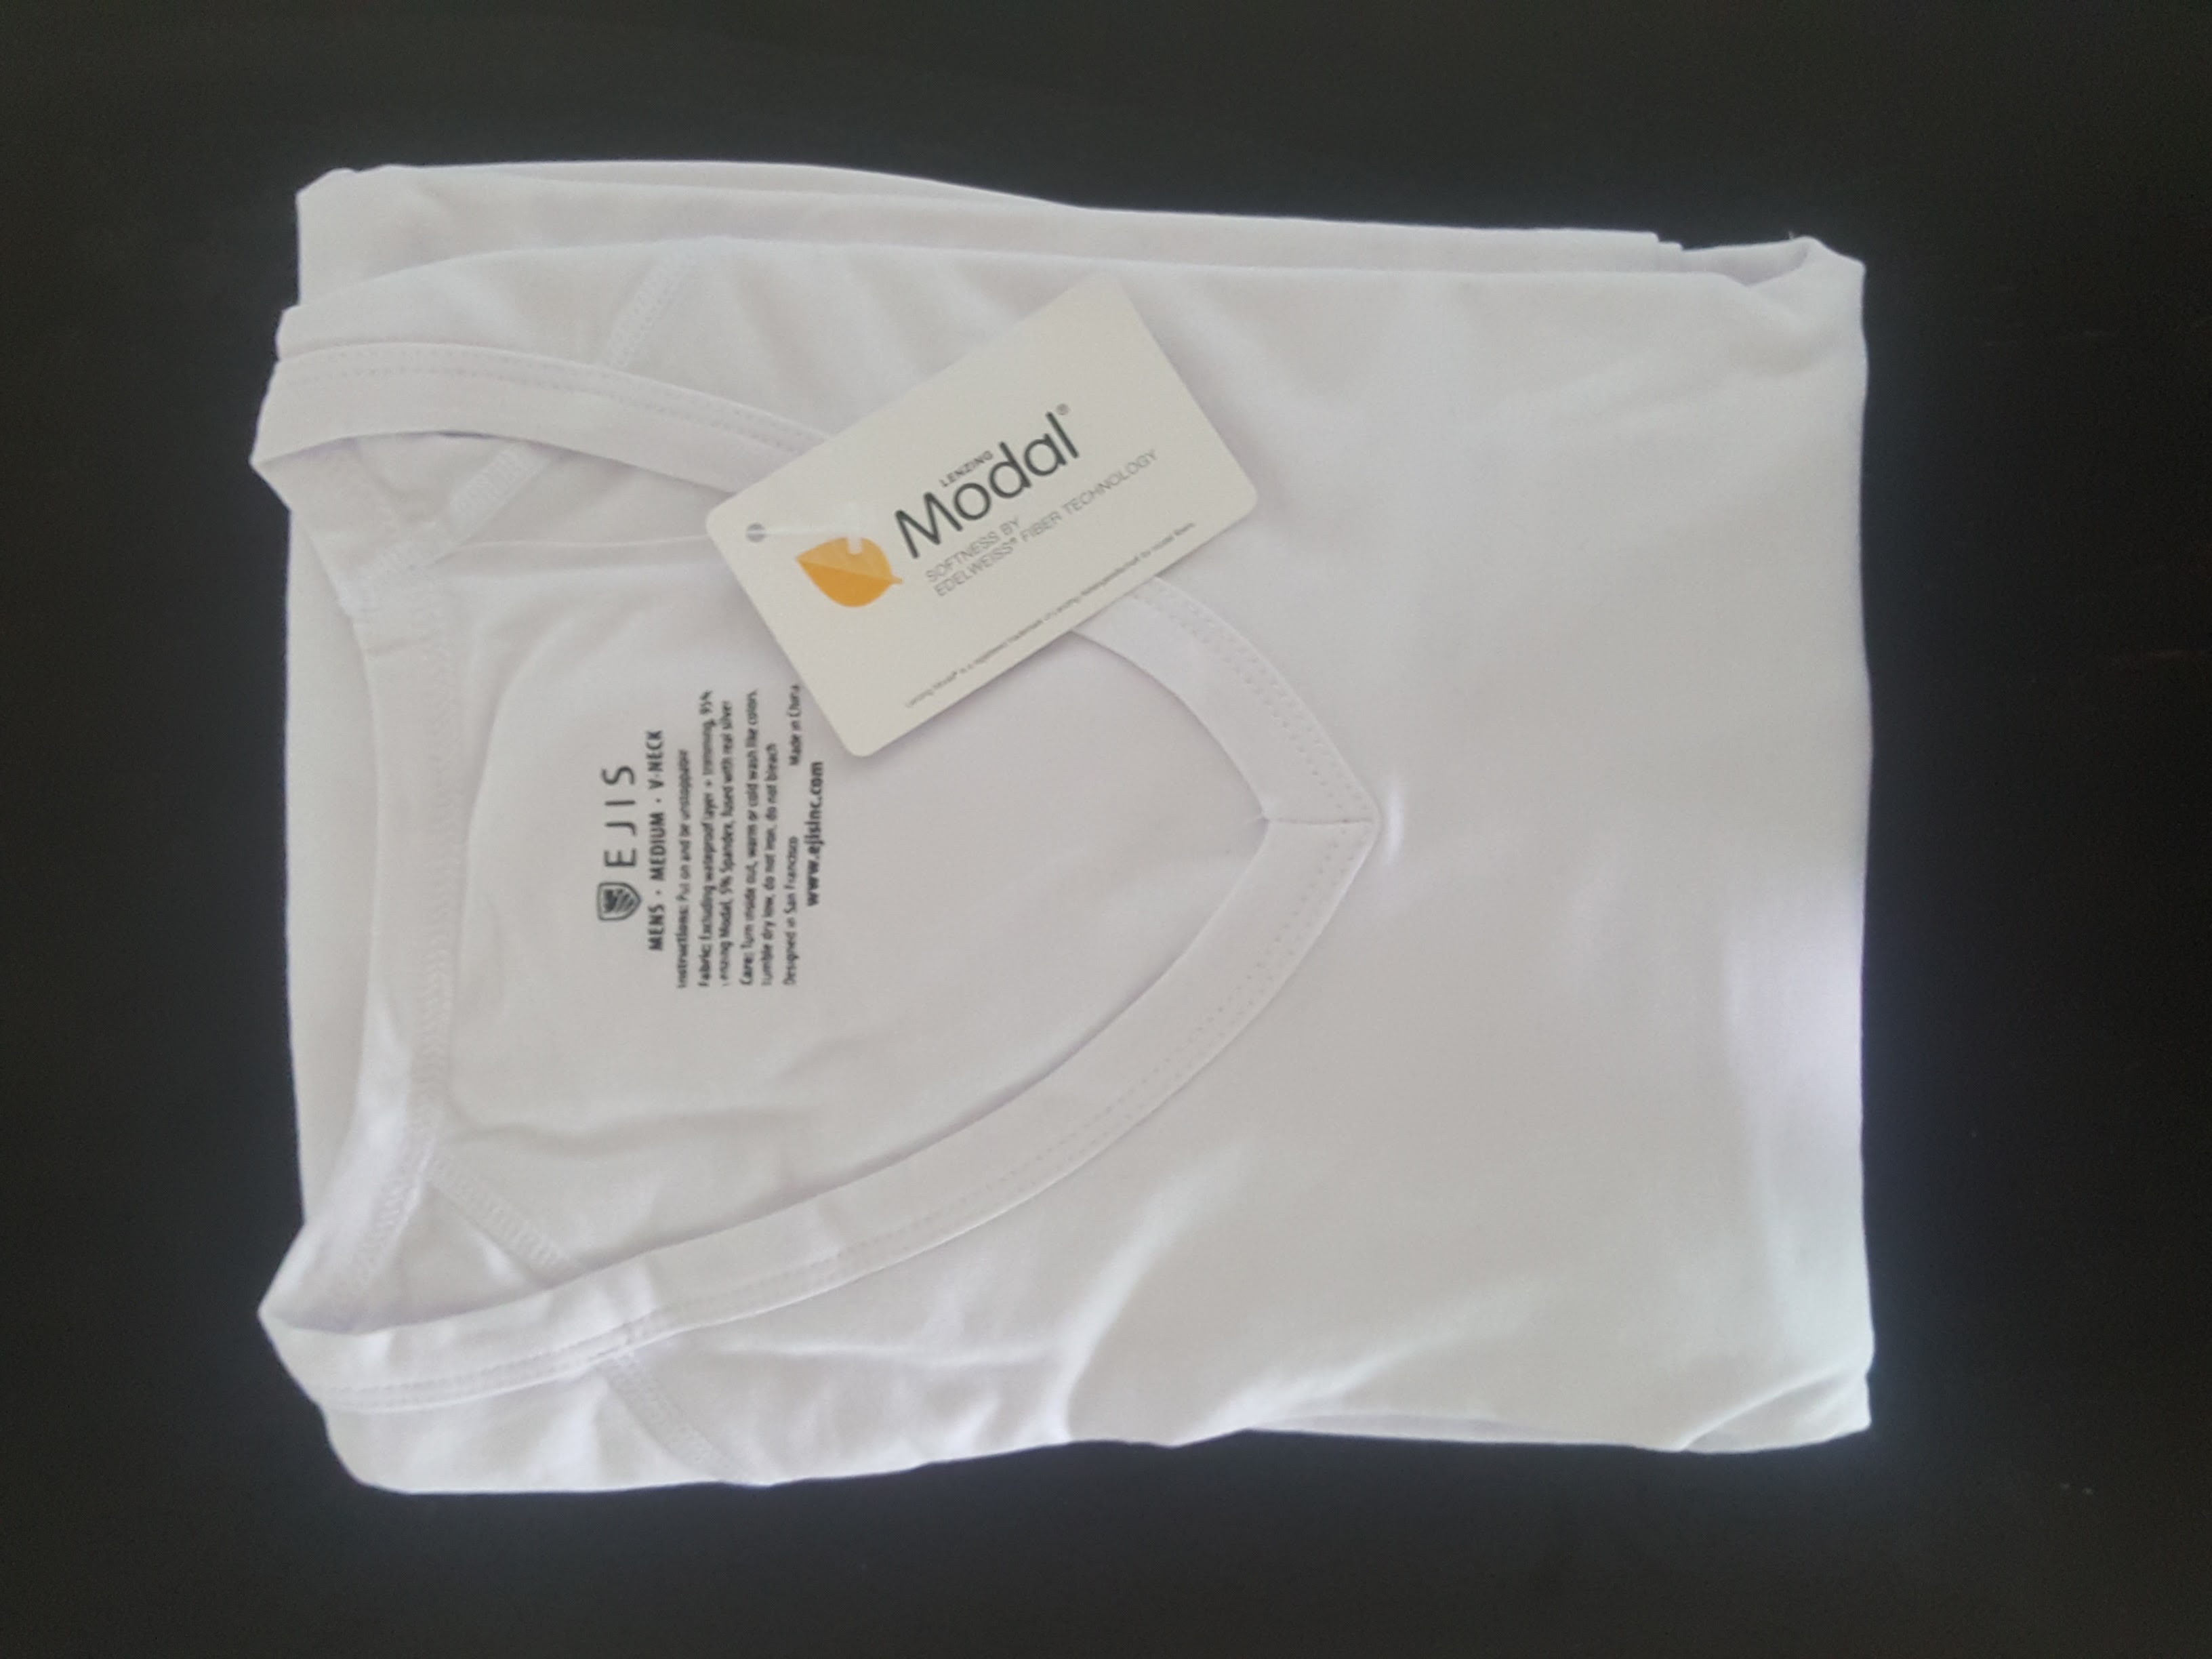 Ejis - Keep your Ejis sweat proof undershirts smelling fresh! While the  silver infused fabric of Ejis products is extremely helpful in fighting  odor caused by bacteria, they may accumulate a slight